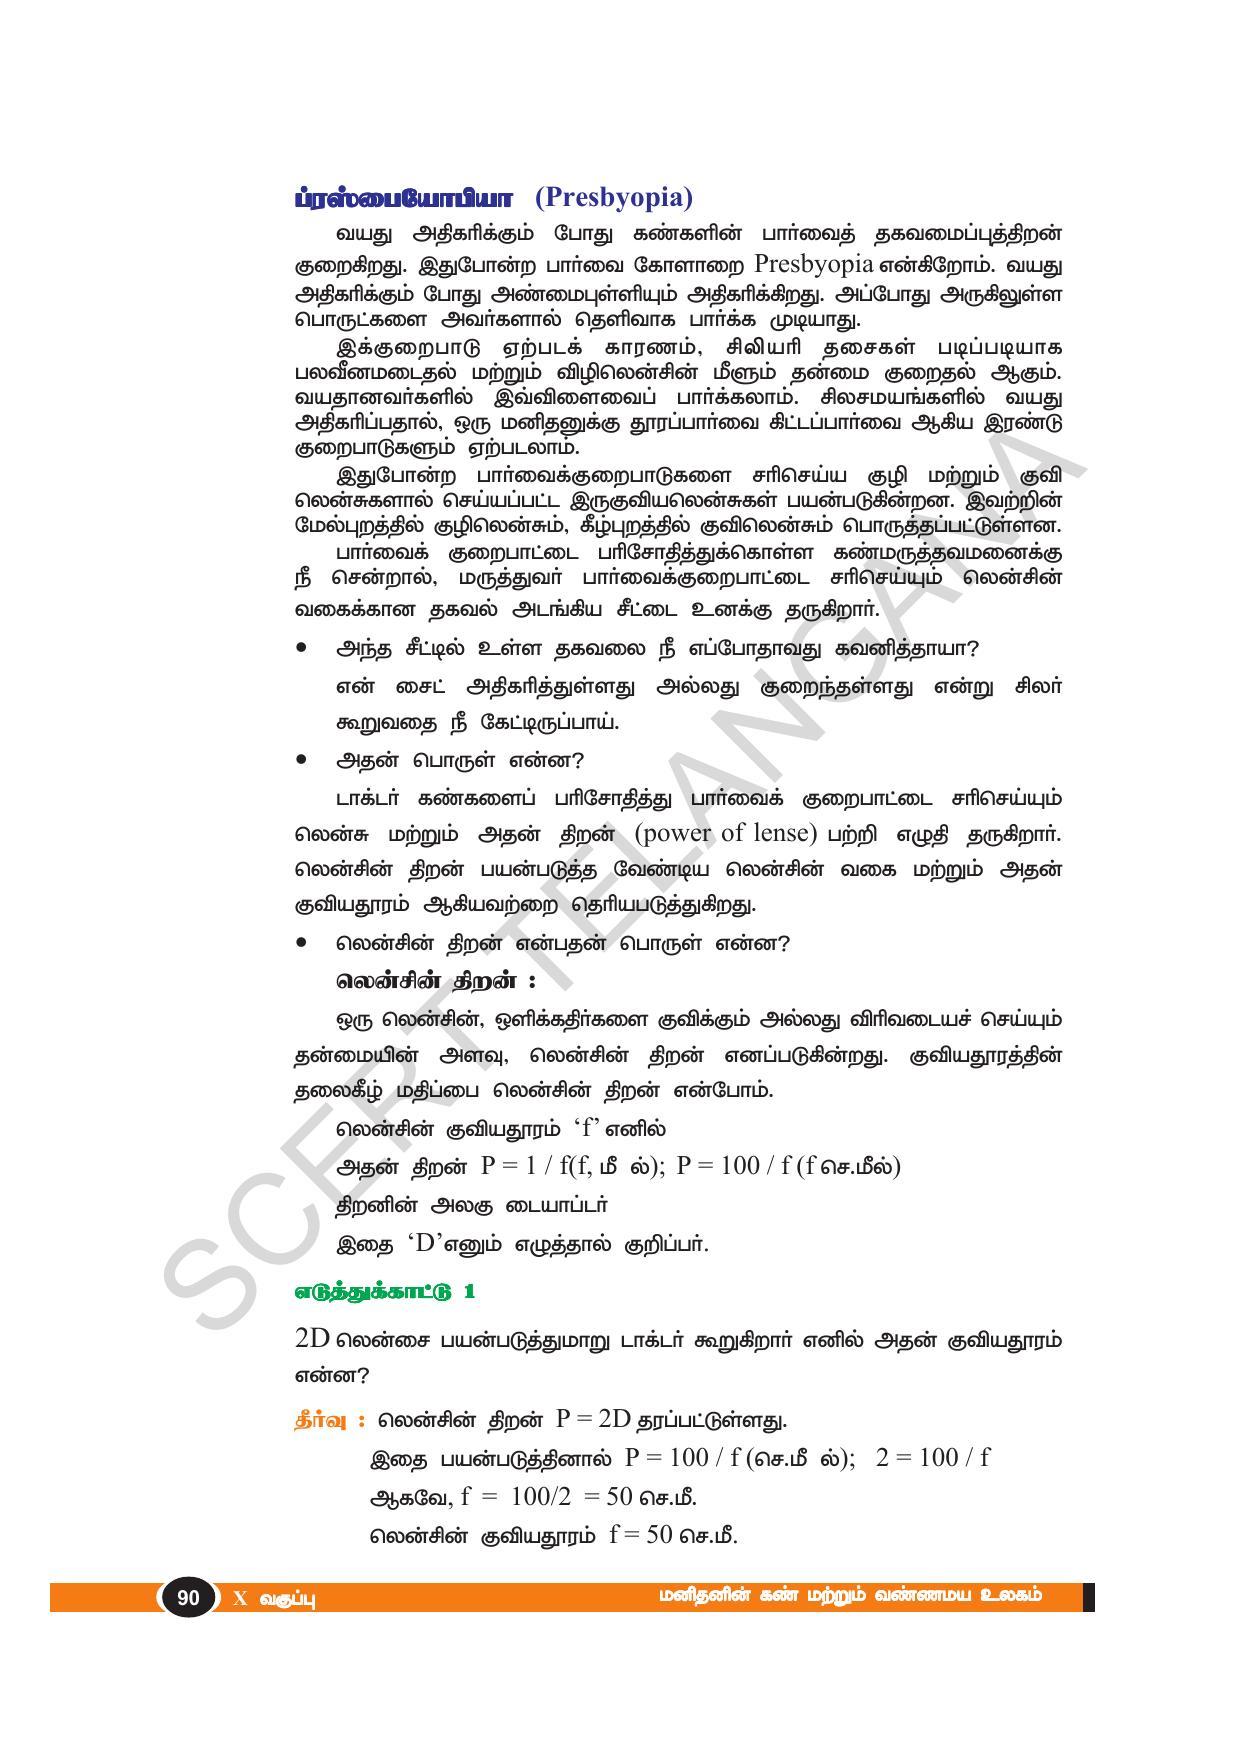 TS SCERT Class 10 Physical Science(Tamil Medium) Text Book - Page 102